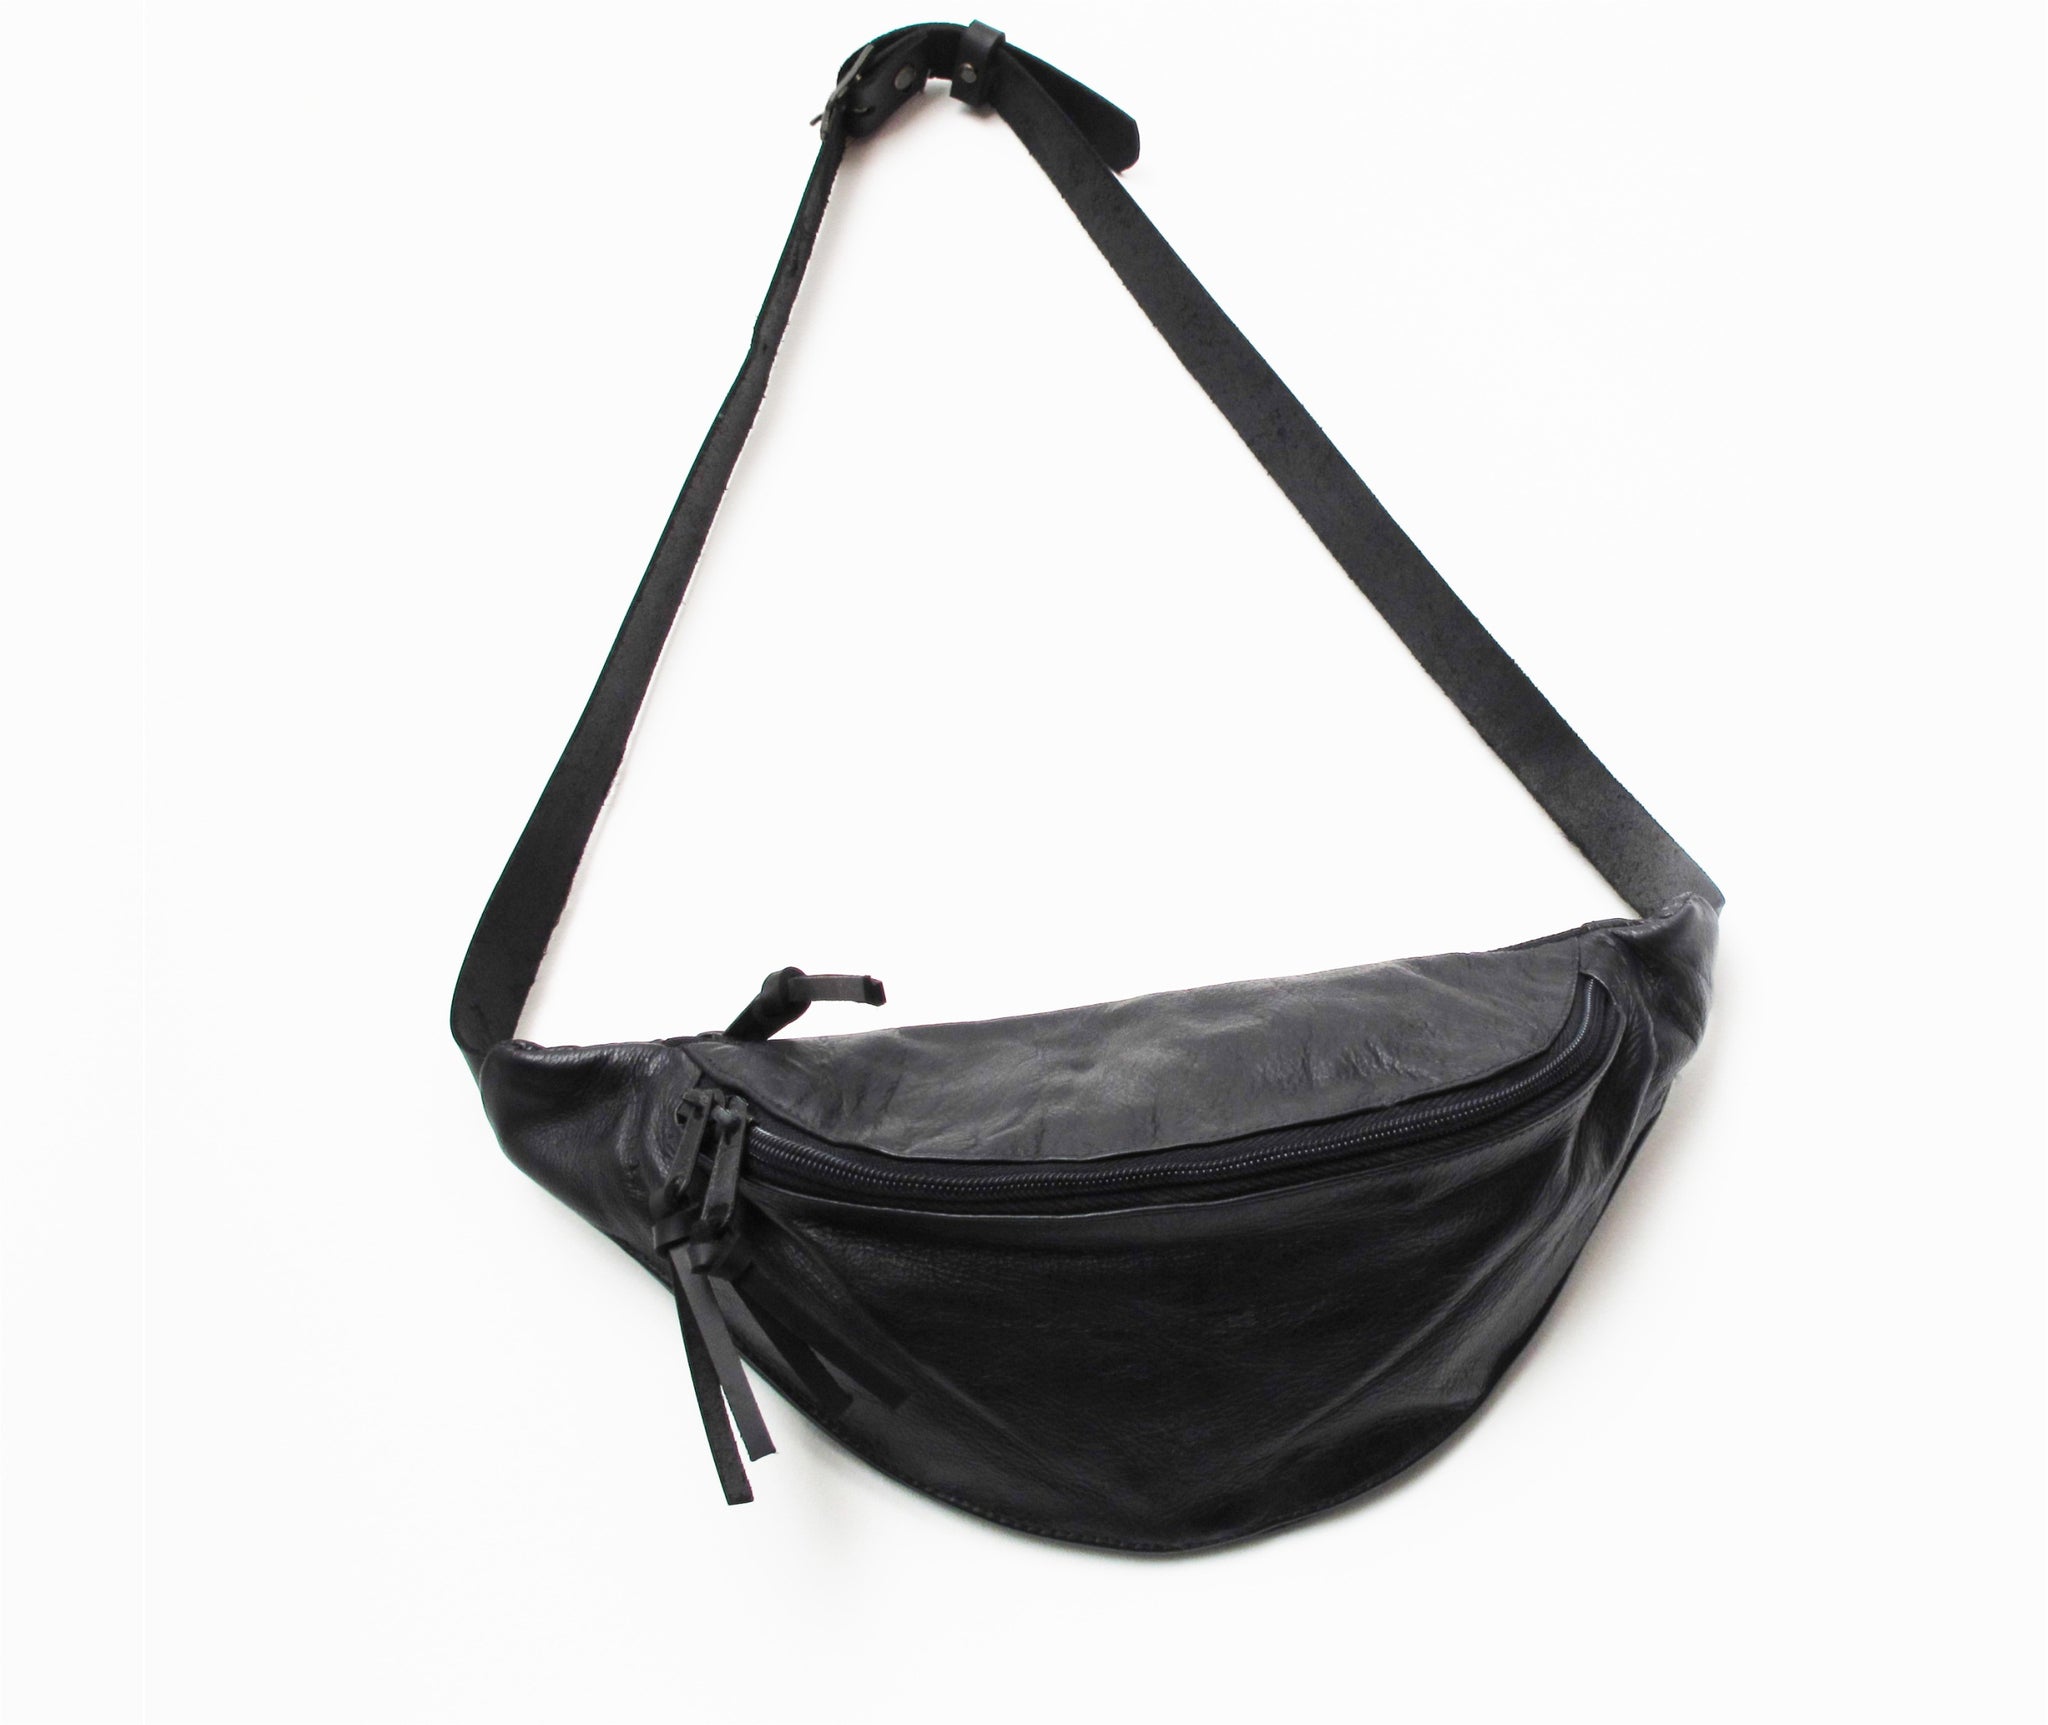 Unisex soft black leather Fannypack with an adjustable leather strap to wear crossbody, on the shoulder, or as a belt bag. The perfect accessory & gift